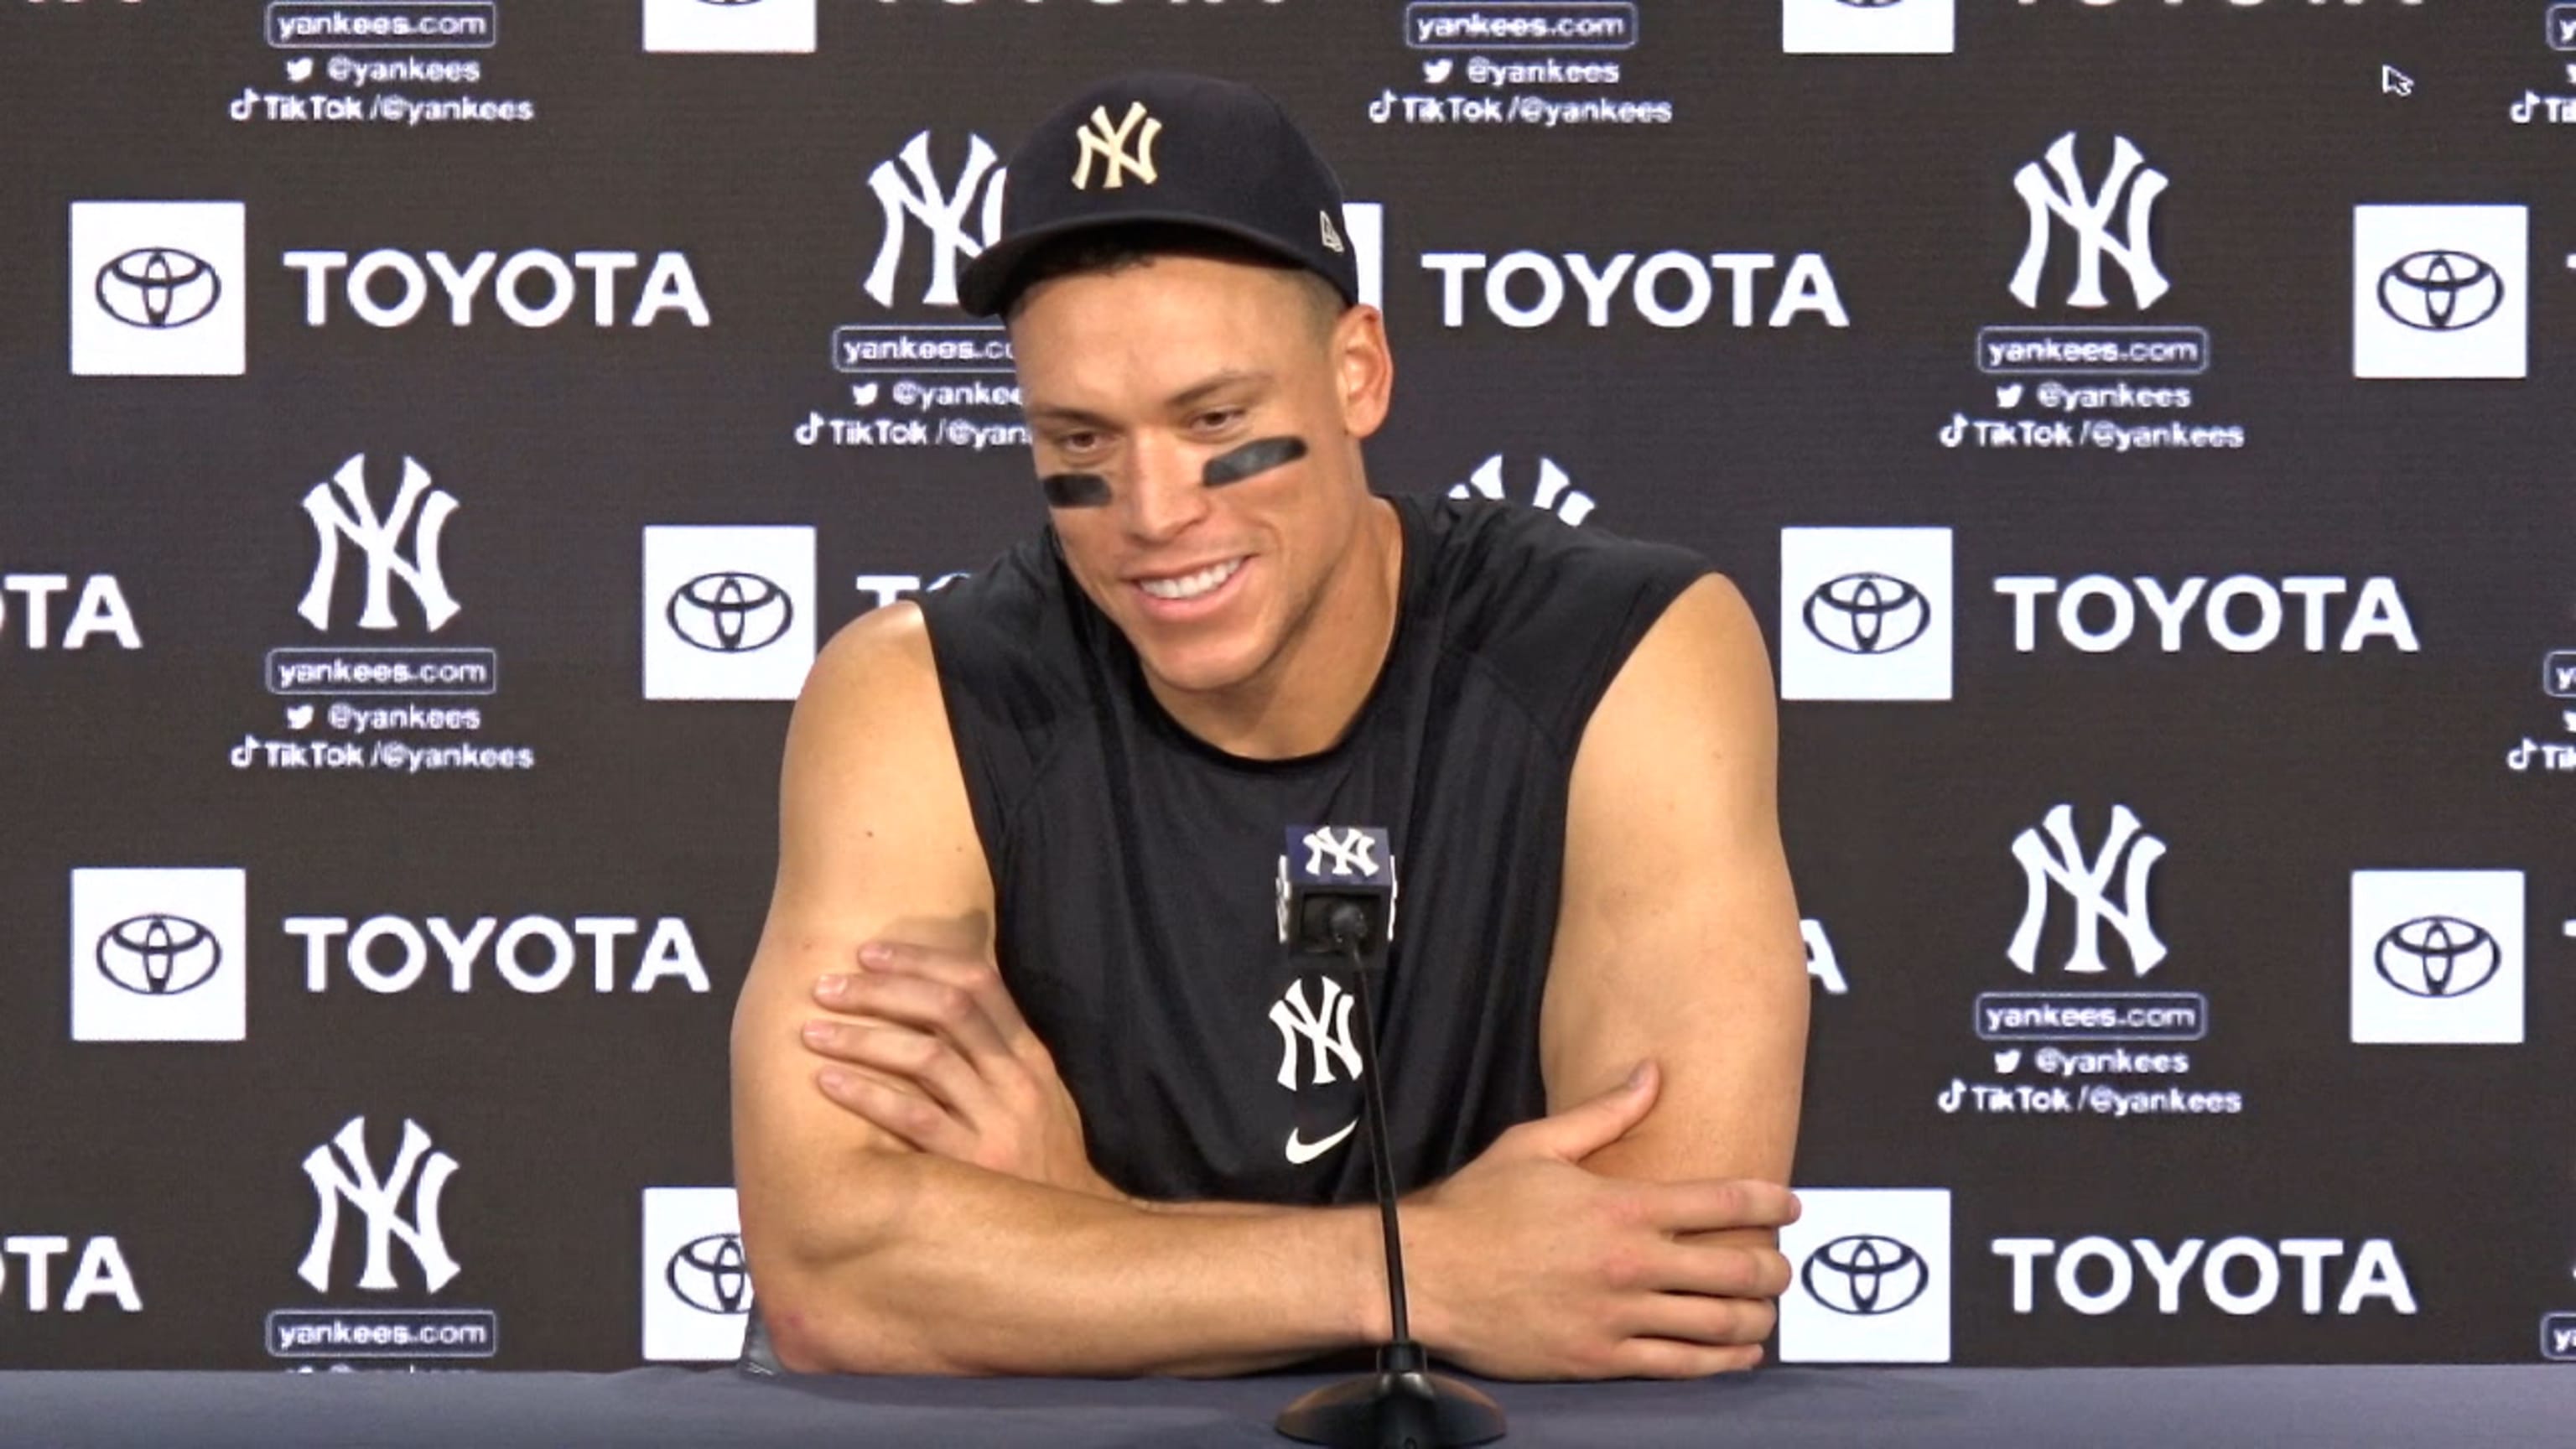 aaron judge without a shirt